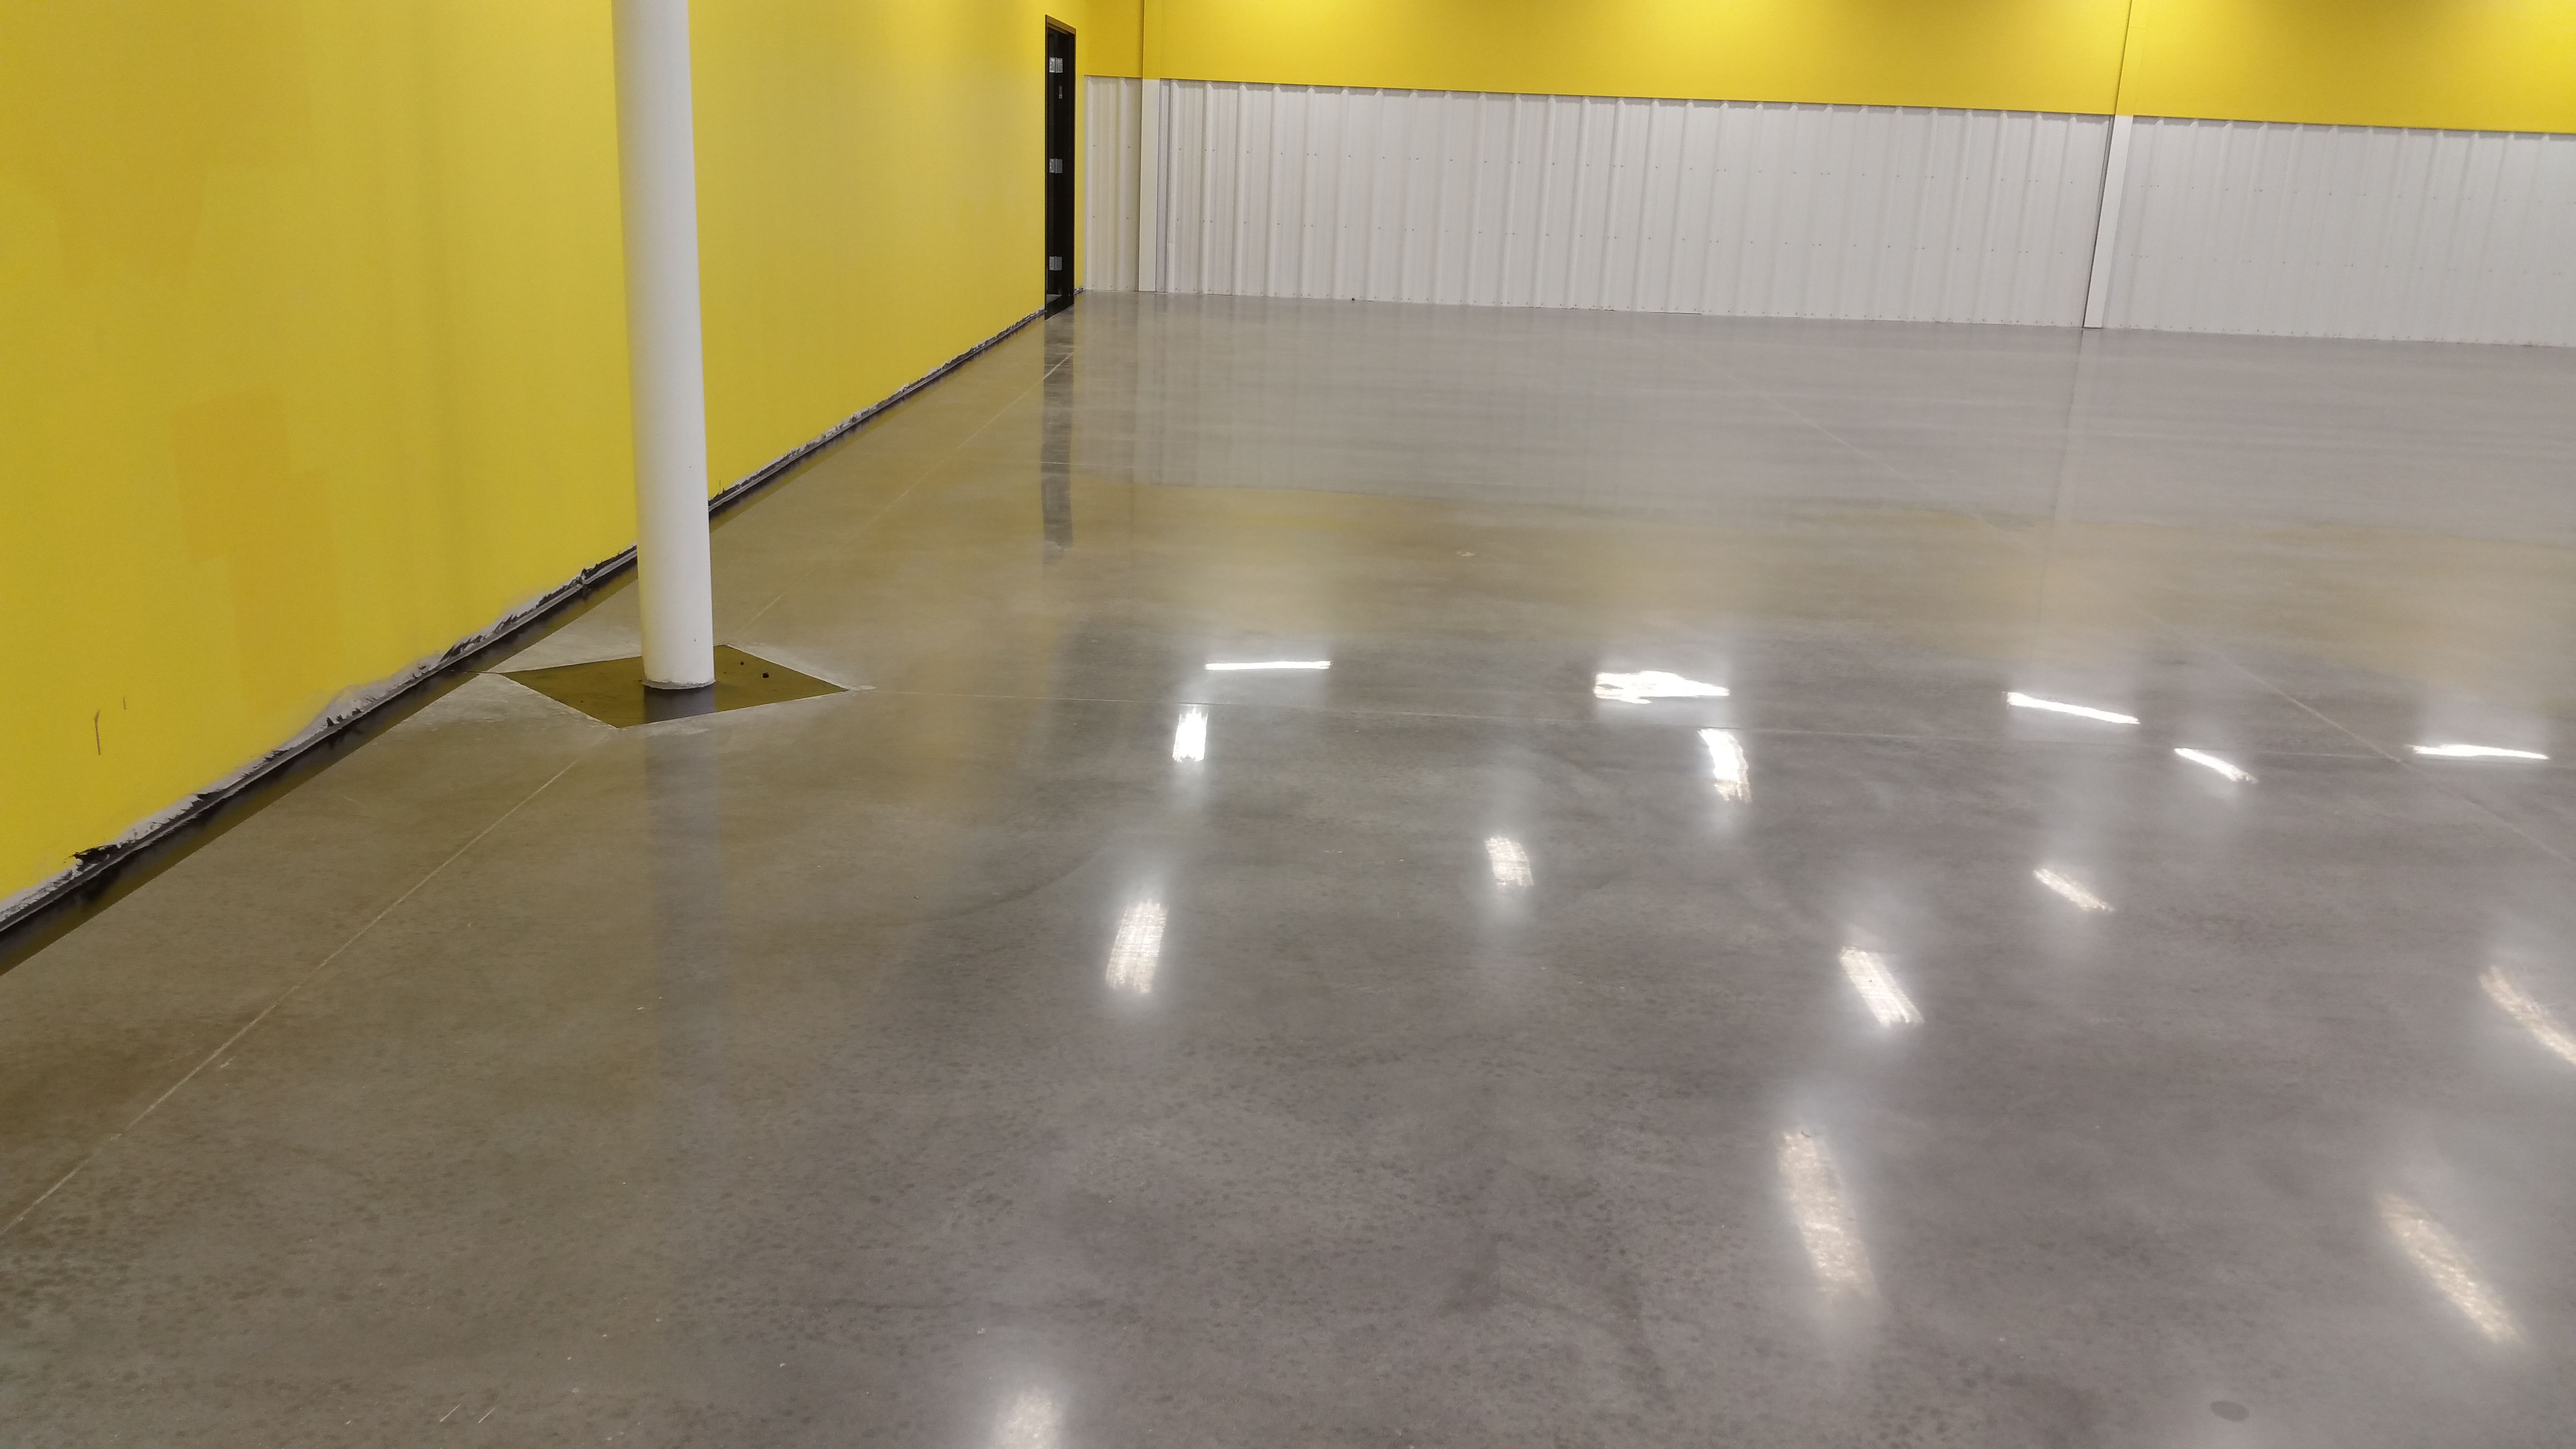 Overhead lights reflect off a polished cement floor.